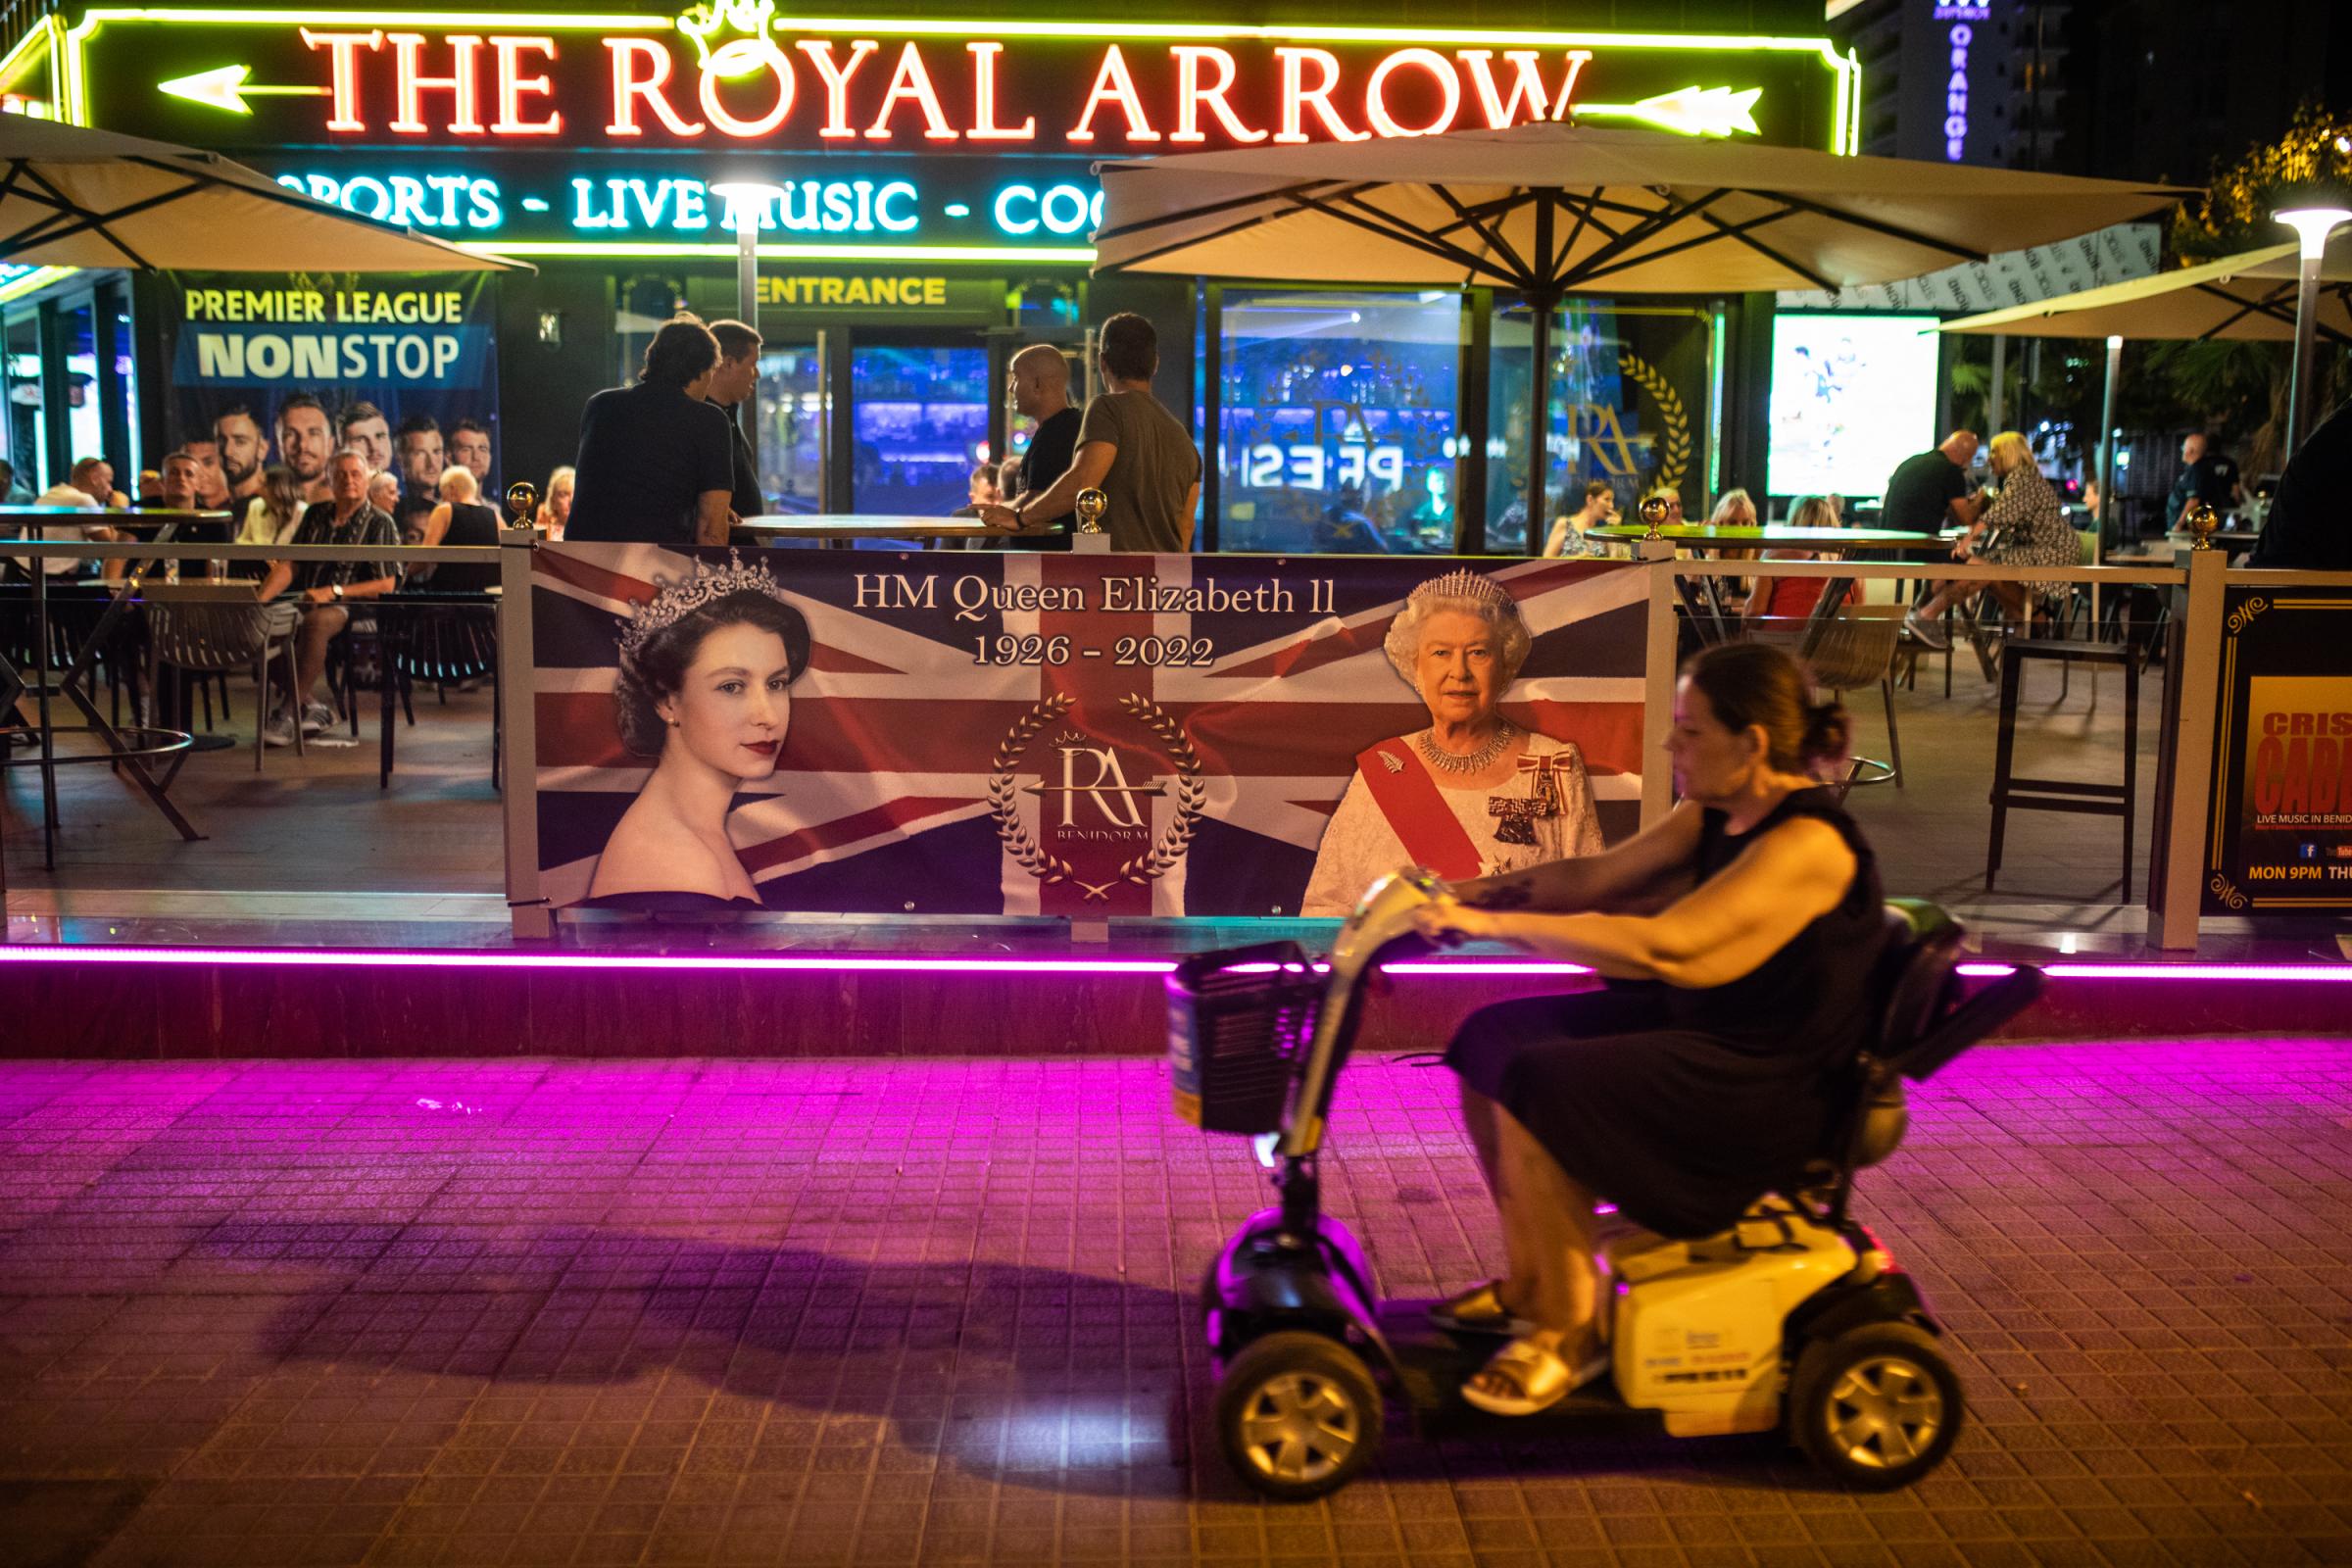 British Tourists In Benidorm Pay Tribute To Queen Elizabeth II - BENIDORM, SPAIN - SEPTEMBER 10: An English tourist with a...